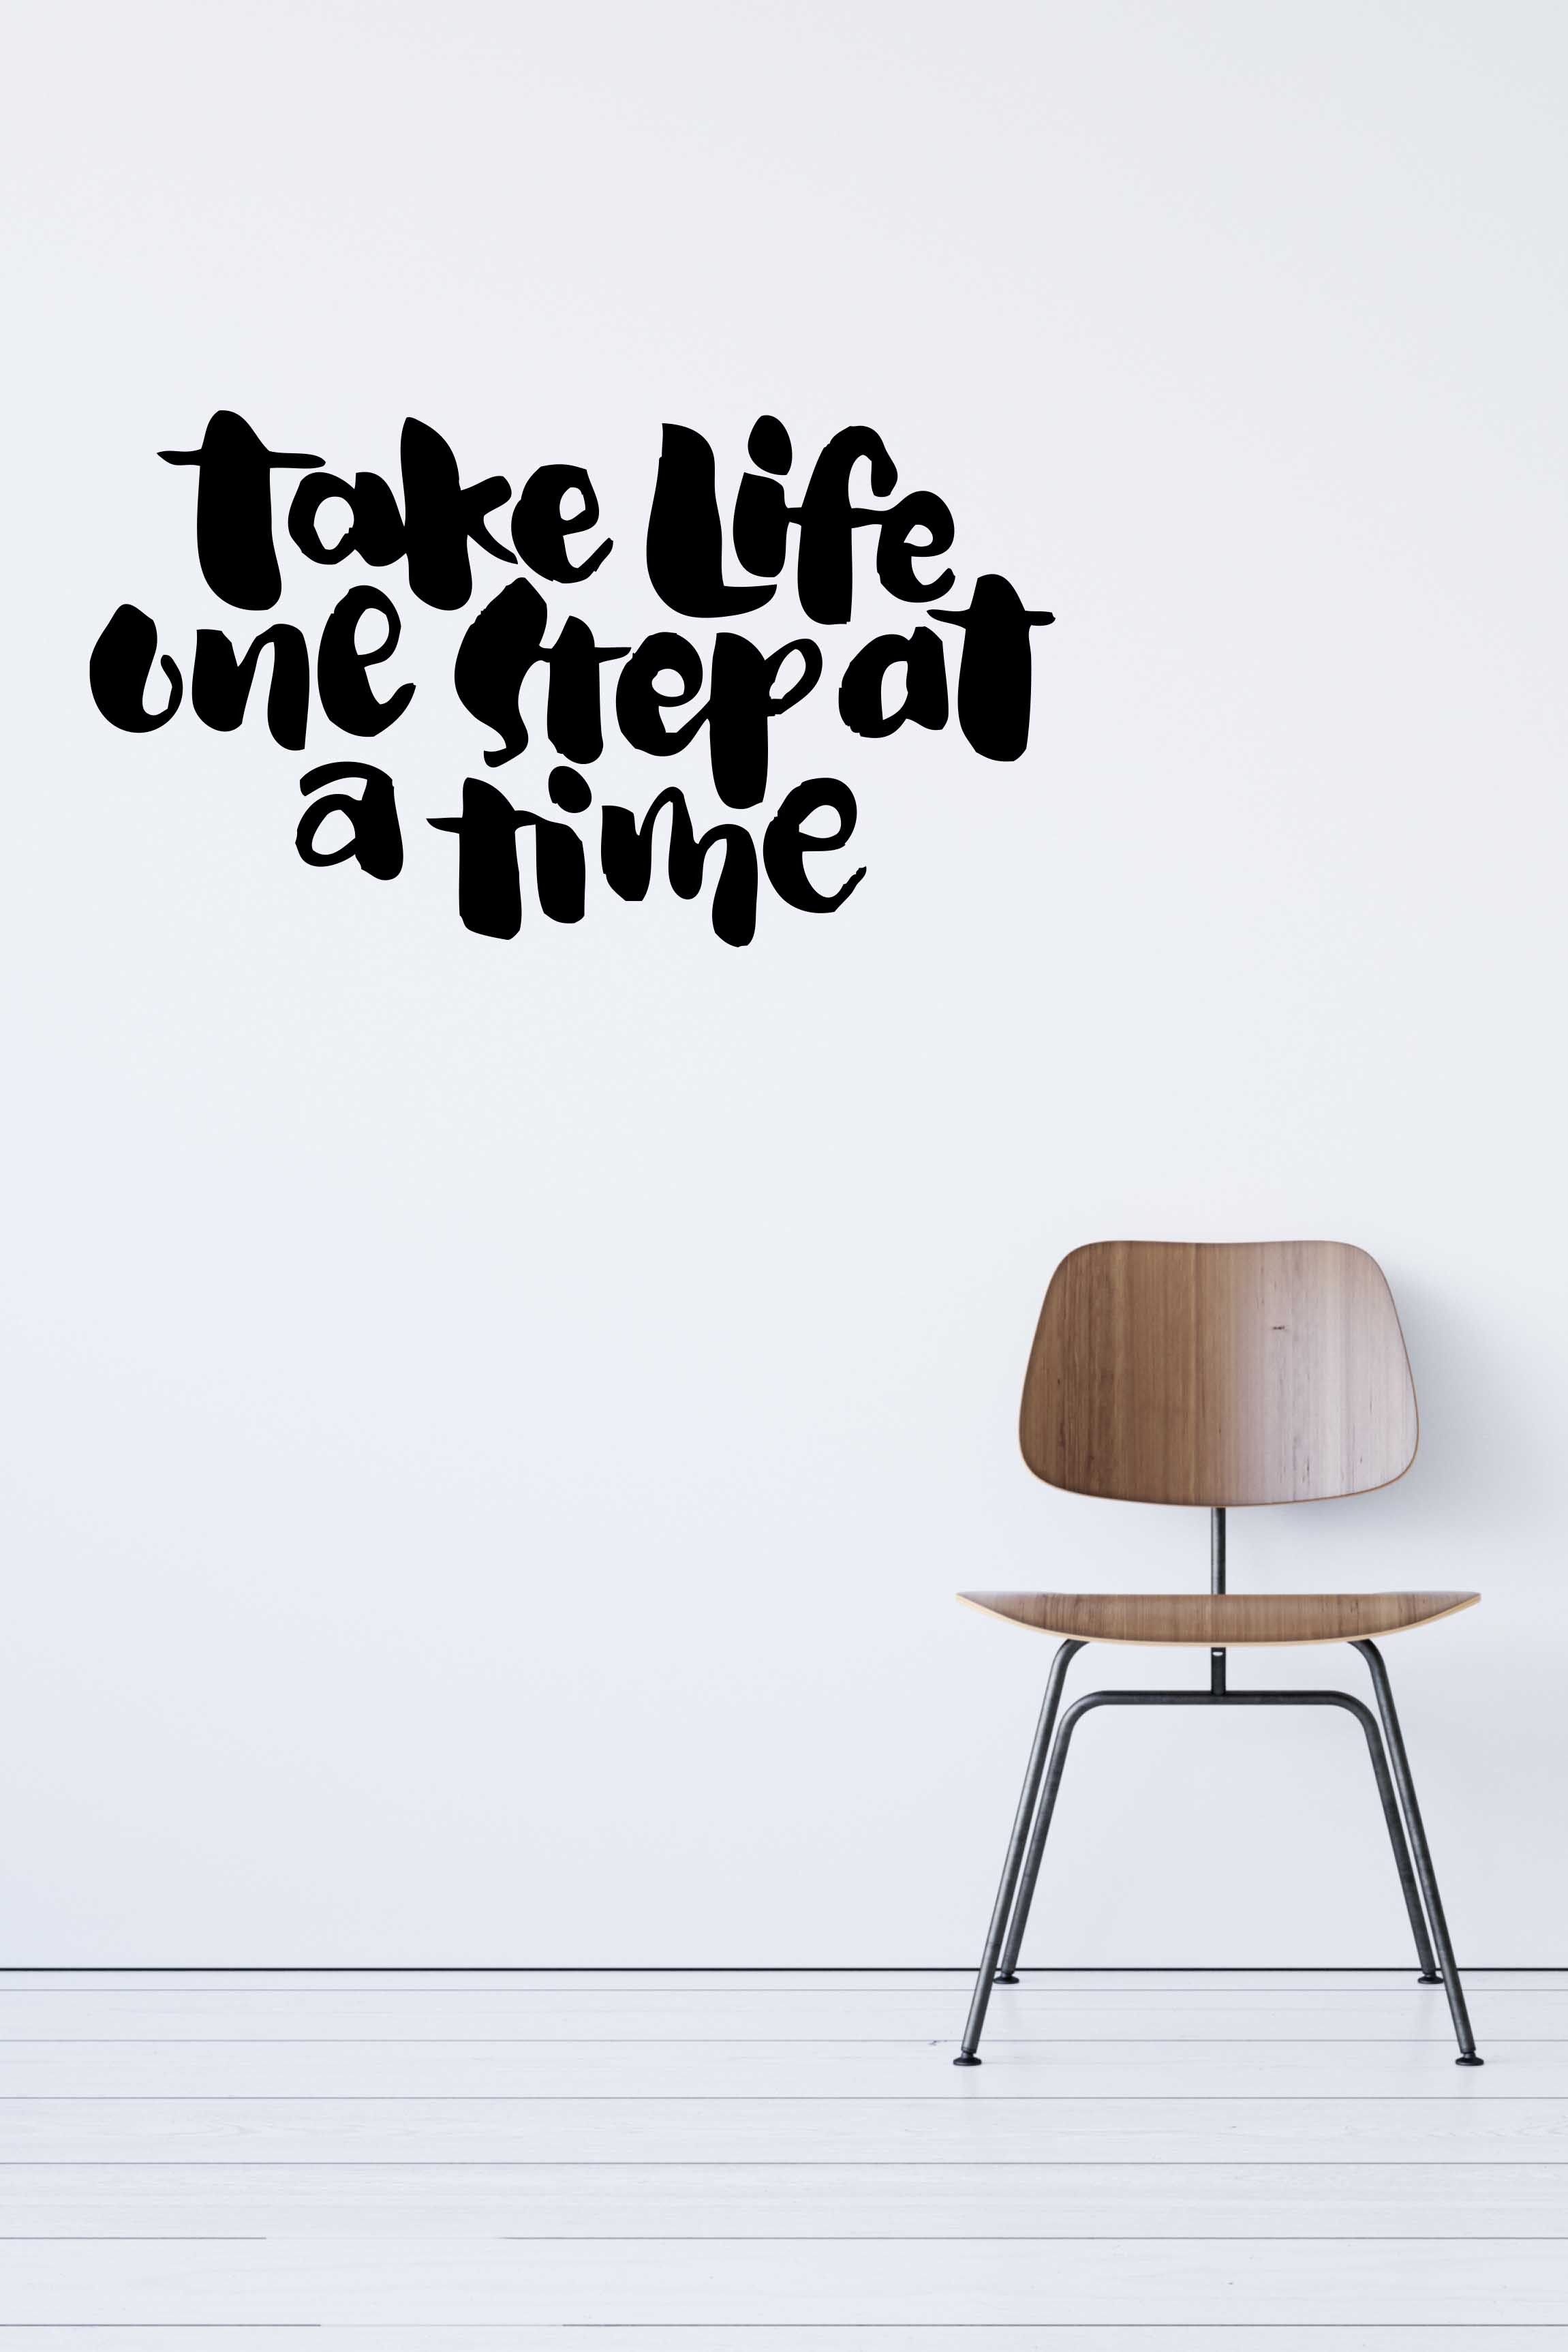 One Step At A Time Wallpapers